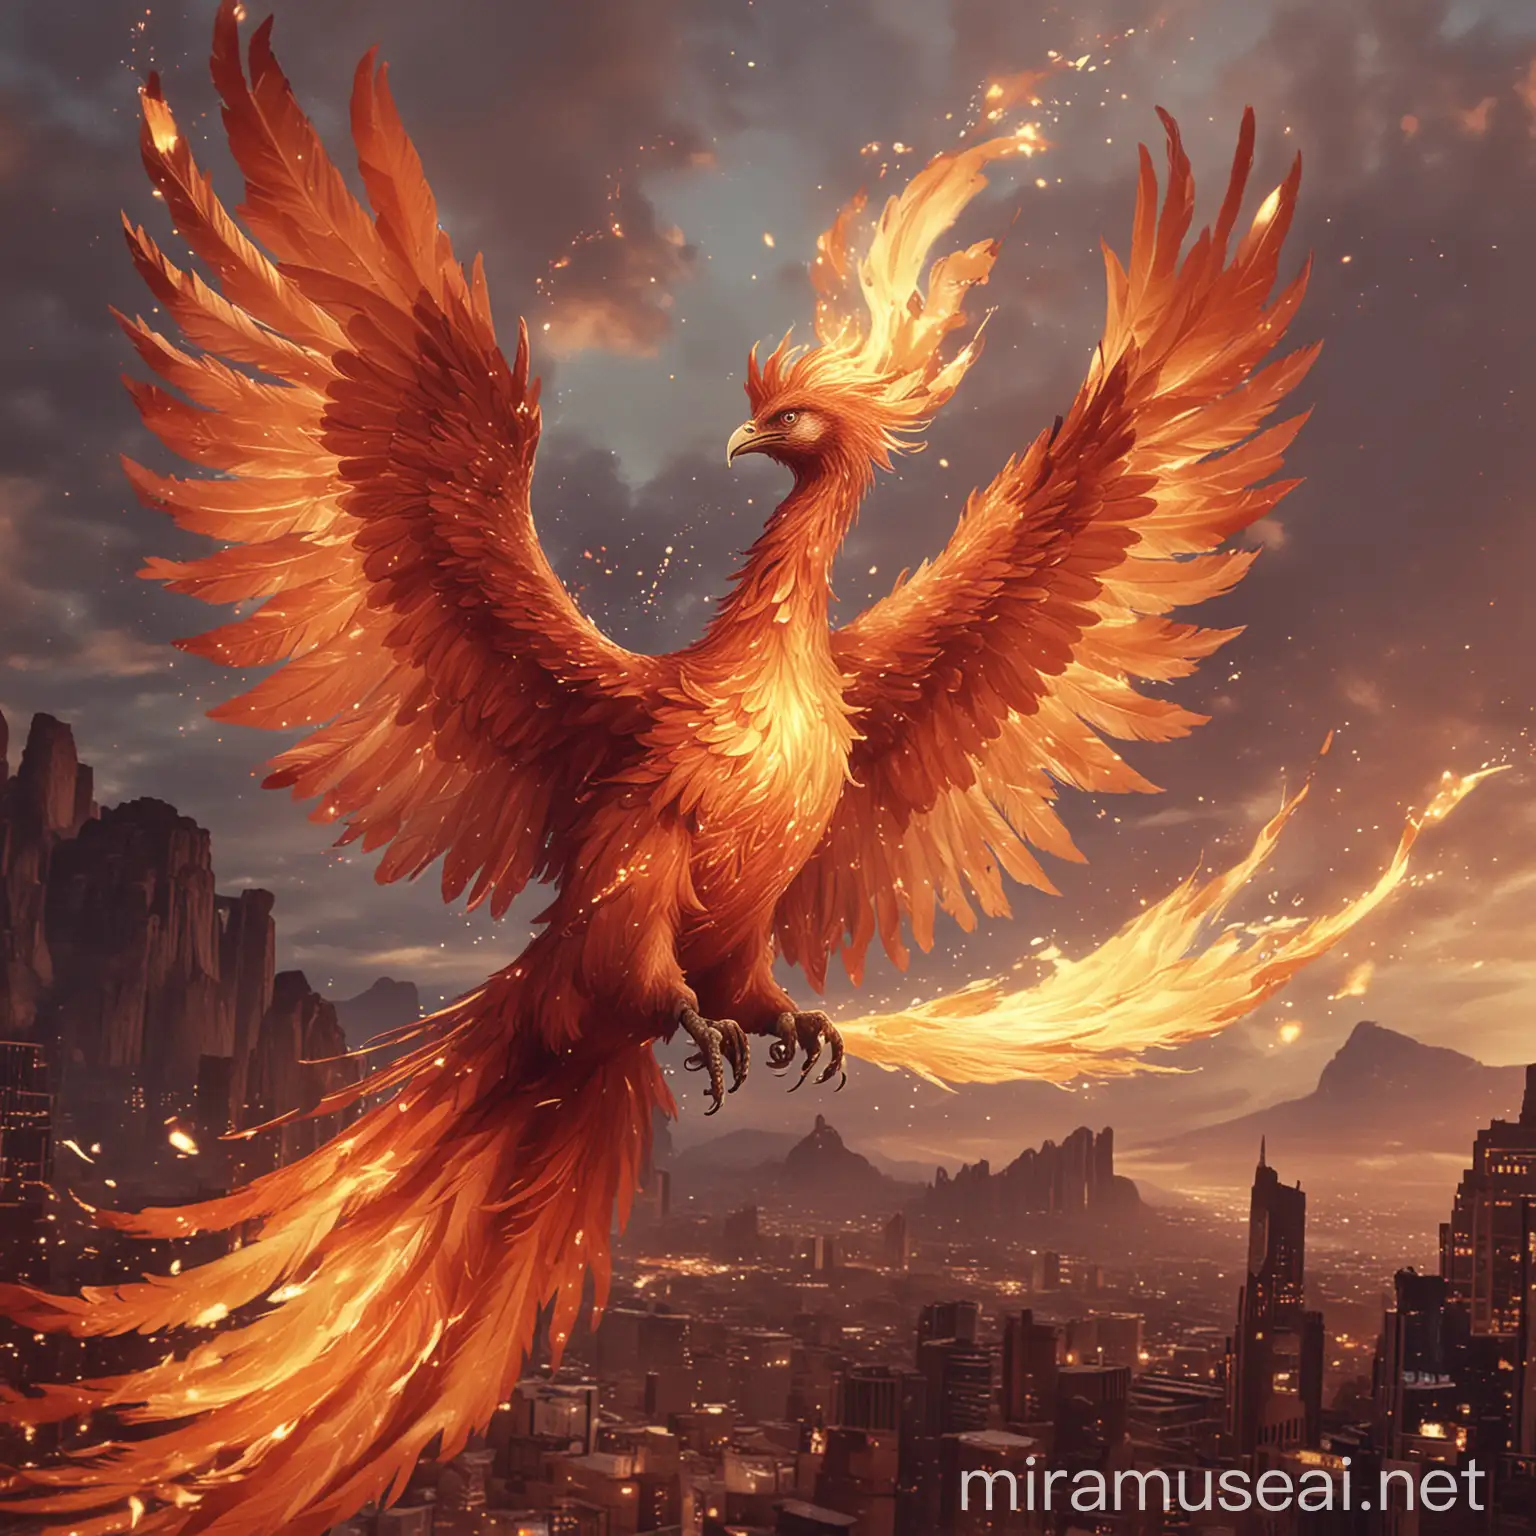 /imagine prompt: A magnificent phoenix with its wings spread wide, soaring through the sky. The phoenix is a powerful symbol of freedom, rebirth, transformation, and breaking free from the chains of addiction. Its vibrant, fiery feathers glow in shades of red (#FF4500), orange (#FFA500), and gold (#FFD700), symbolizing strength and renewal. The background shows a clear, blue sky (#87CEEB) with a few fluffy clouds (#F0F8FF), representing a new beginning and hope. Below the phoenix, subtle hints of broken chains and shadows fading away illustrate the triumph over addiction. 

The overall mood is majestic and liberating, capturing the essence of the phoenix's mythical and powerful nature, and the journey of overcoming and rising above past struggles. Add radiant light effects surrounding the phoenix, enhancing its fiery glow and emphasizing its divine nature. 

Place the scene in a serene, natural setting, such as a tranquil forest clearing with lush green trees (#228B22) and vibrant, colorful flowers (#FF69B4, #FFD700), or a peaceful mountain landscape with gentle, earthy tones (#8B4513), symbolizing healing and recovery. Include a flowing river (#4682B4) in the background, reflecting the light and adding a sense of tranquility and continuity.

Draw inspiration from Vincent van Gogh's expressive brushwork and vibrant color palette to create a dynamic and emotionally powerful image. Use swirling patterns in the sky and landscape to add a sense of movement and energy. Incorporate small details such as butterflies fluttering around (#FFB6C1) and birds flying in the distance (#4682B4), symbolizing freedom and a new life.

Ensure the phoenix's eyes are bright and intense, glowing with inner fire and determination. Add a soft halo effect around the phoenix to signify its sacred and transformative nature. The feathers should have intricate, detailed patterns that catch the light, with subtle gradients and highlights to show depth and texture.